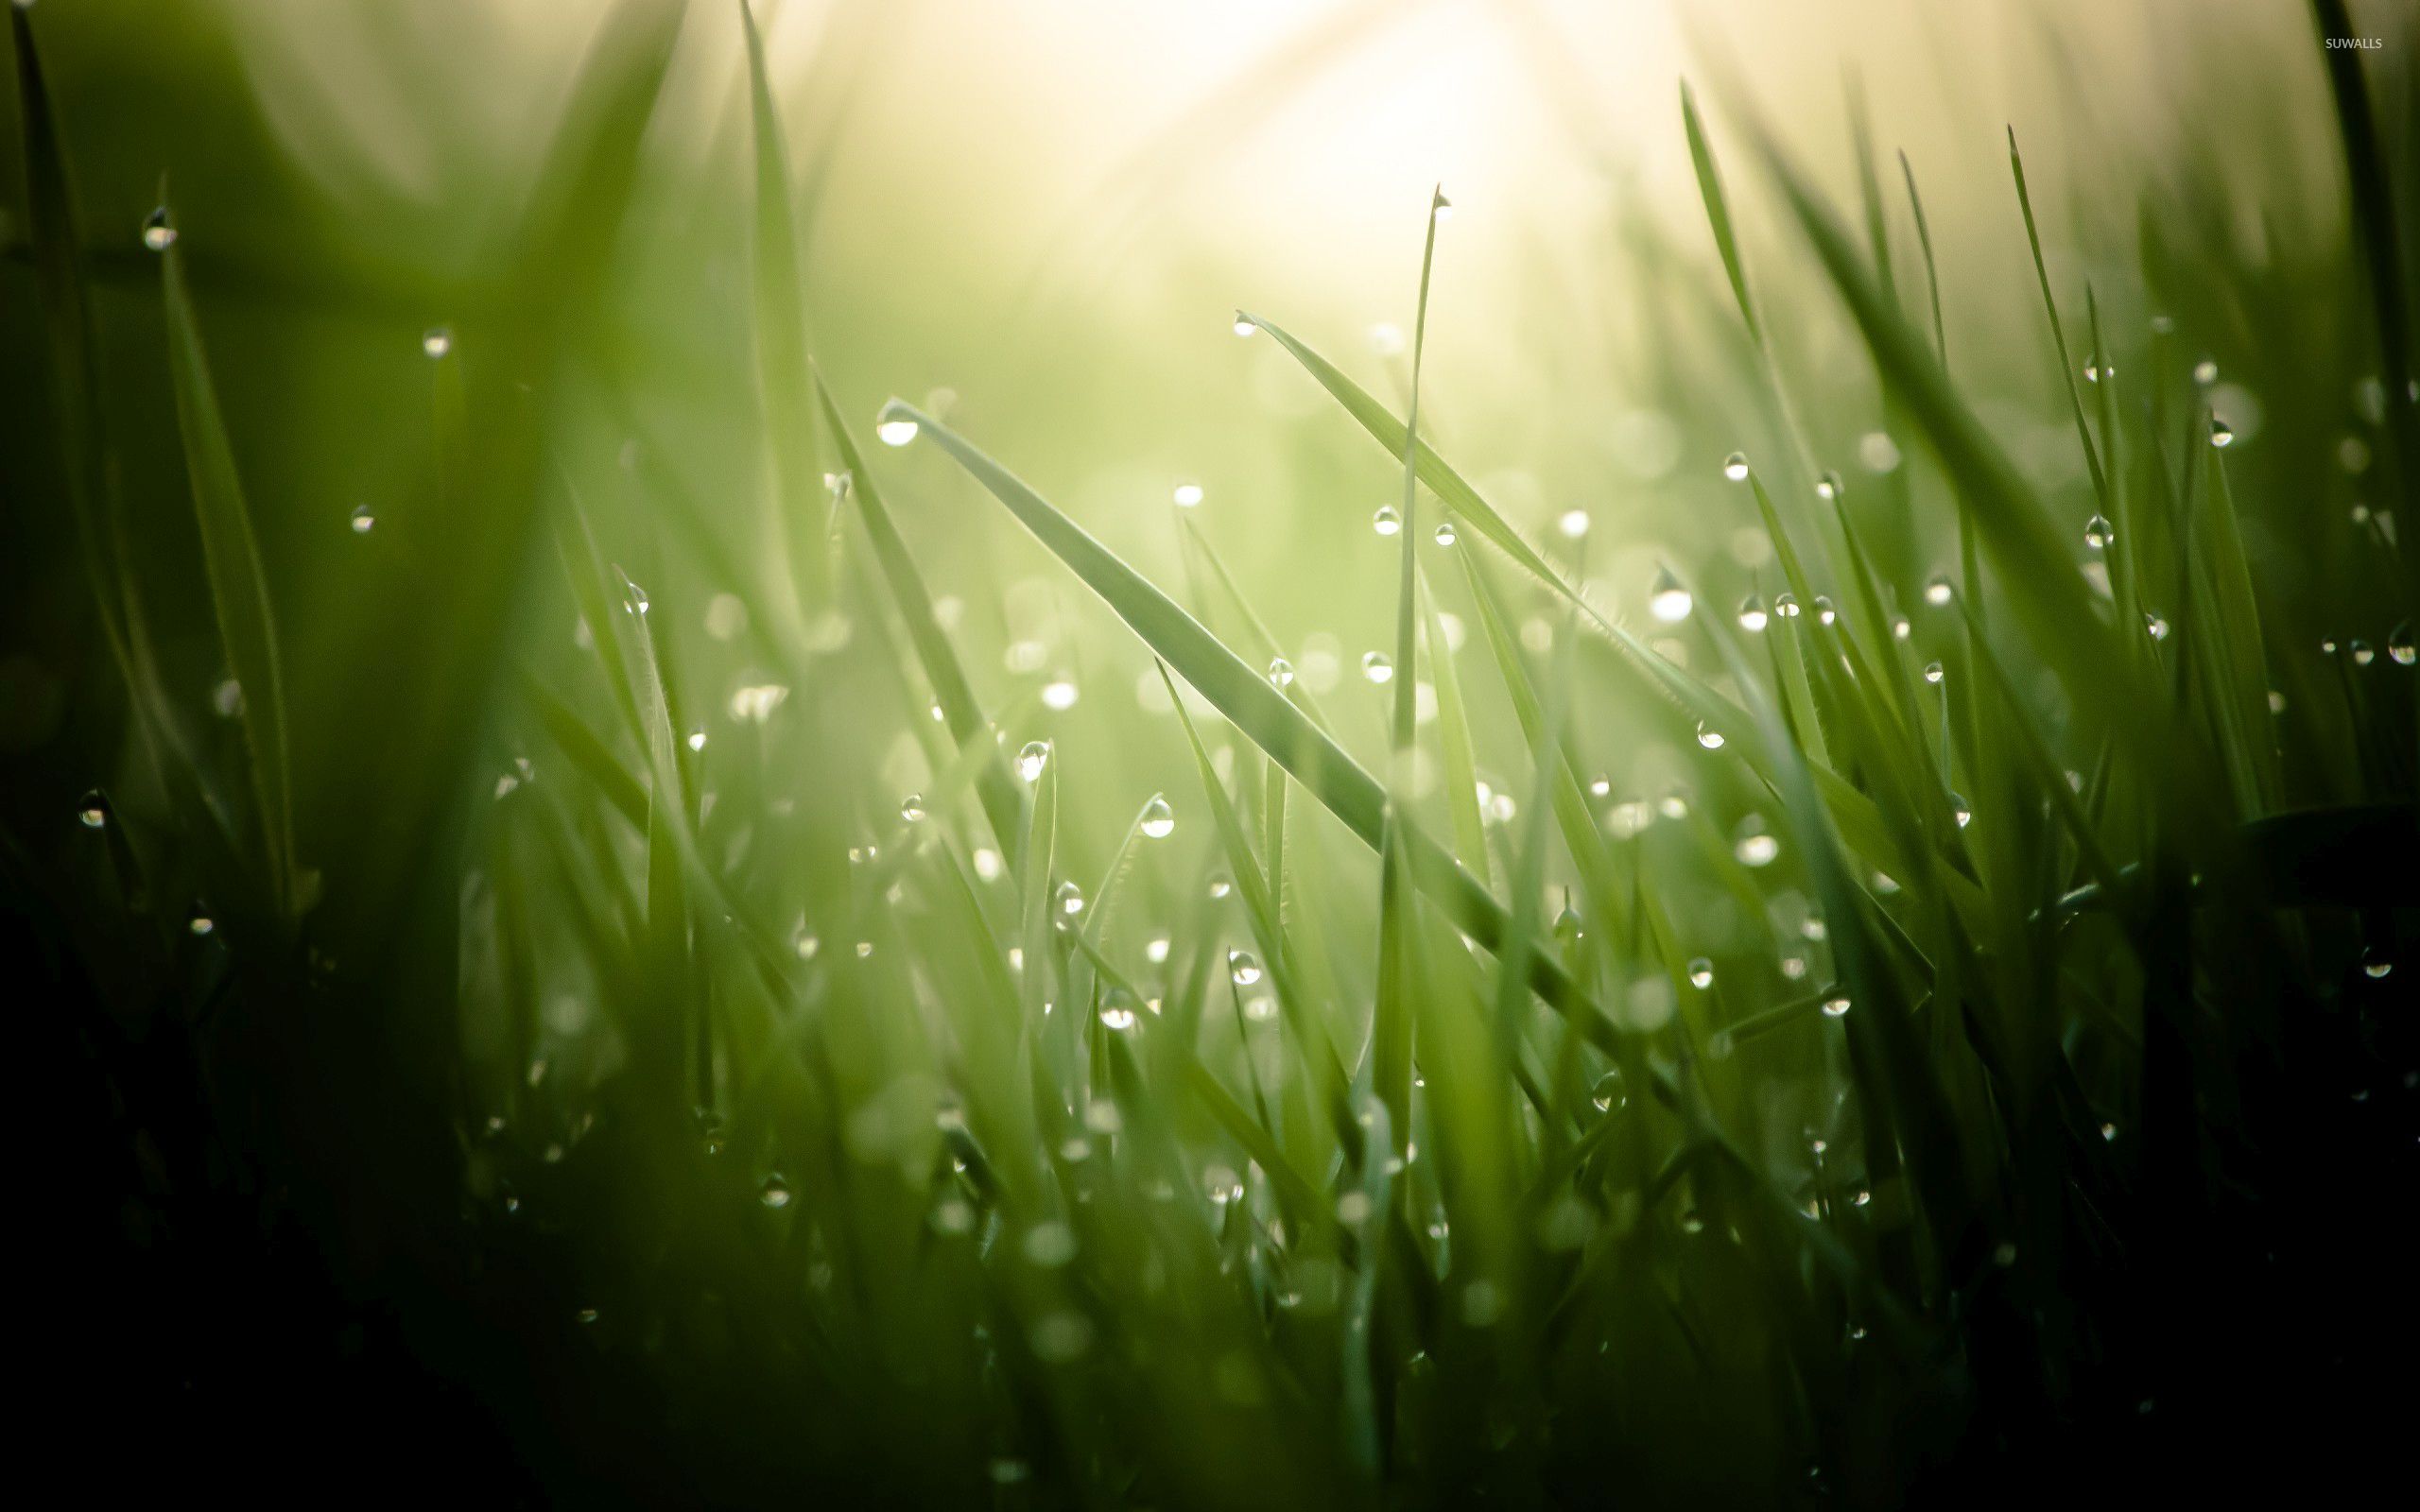 Dew drops on grass [2] wallpaper - Photography wallpapers - #32943